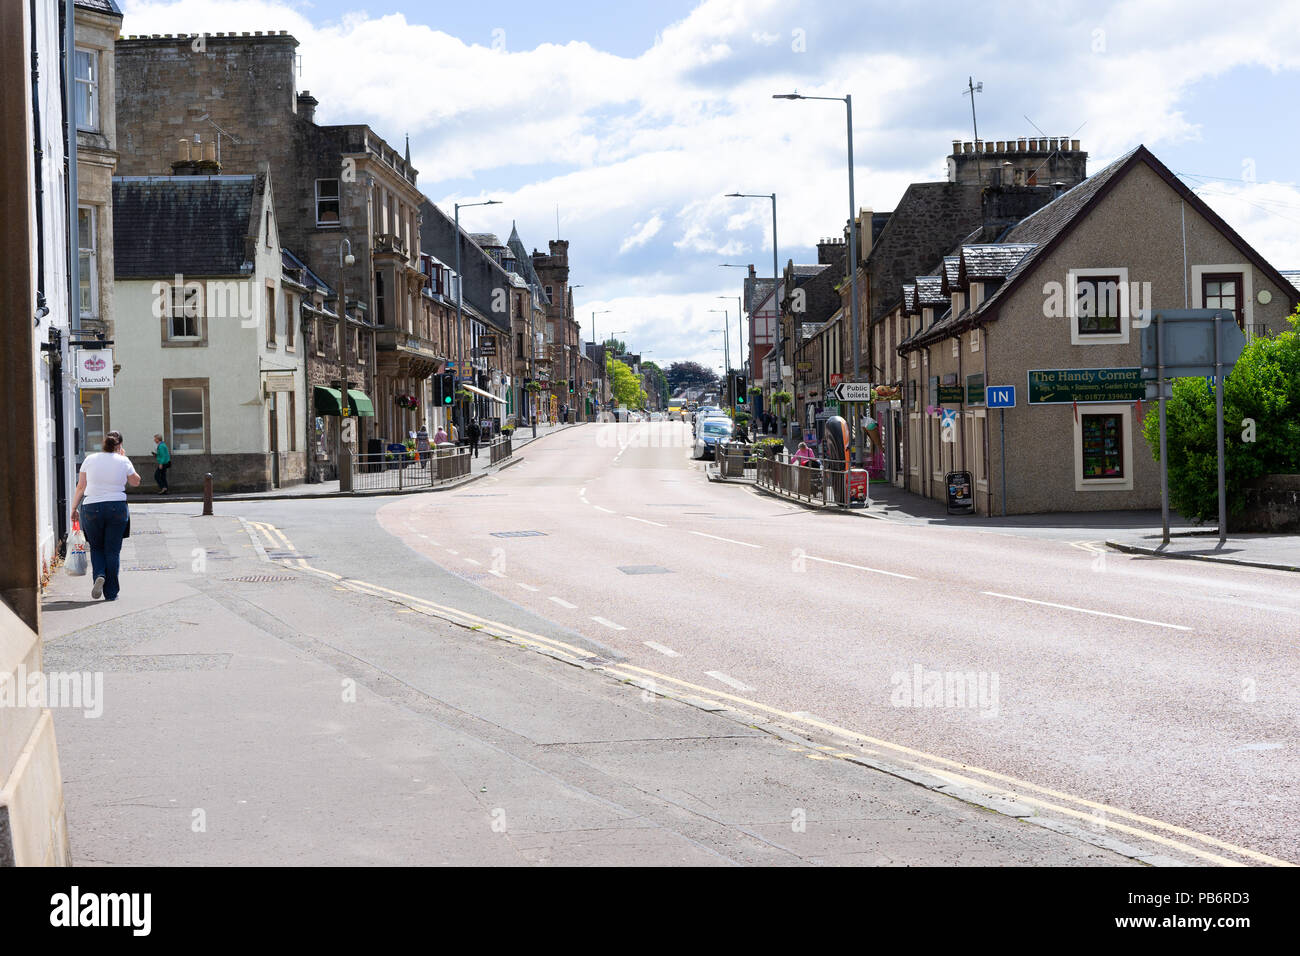 The main road (A84) going through the small Scottish town of Callander, Stirling, Scotland, UK. Stock Photo